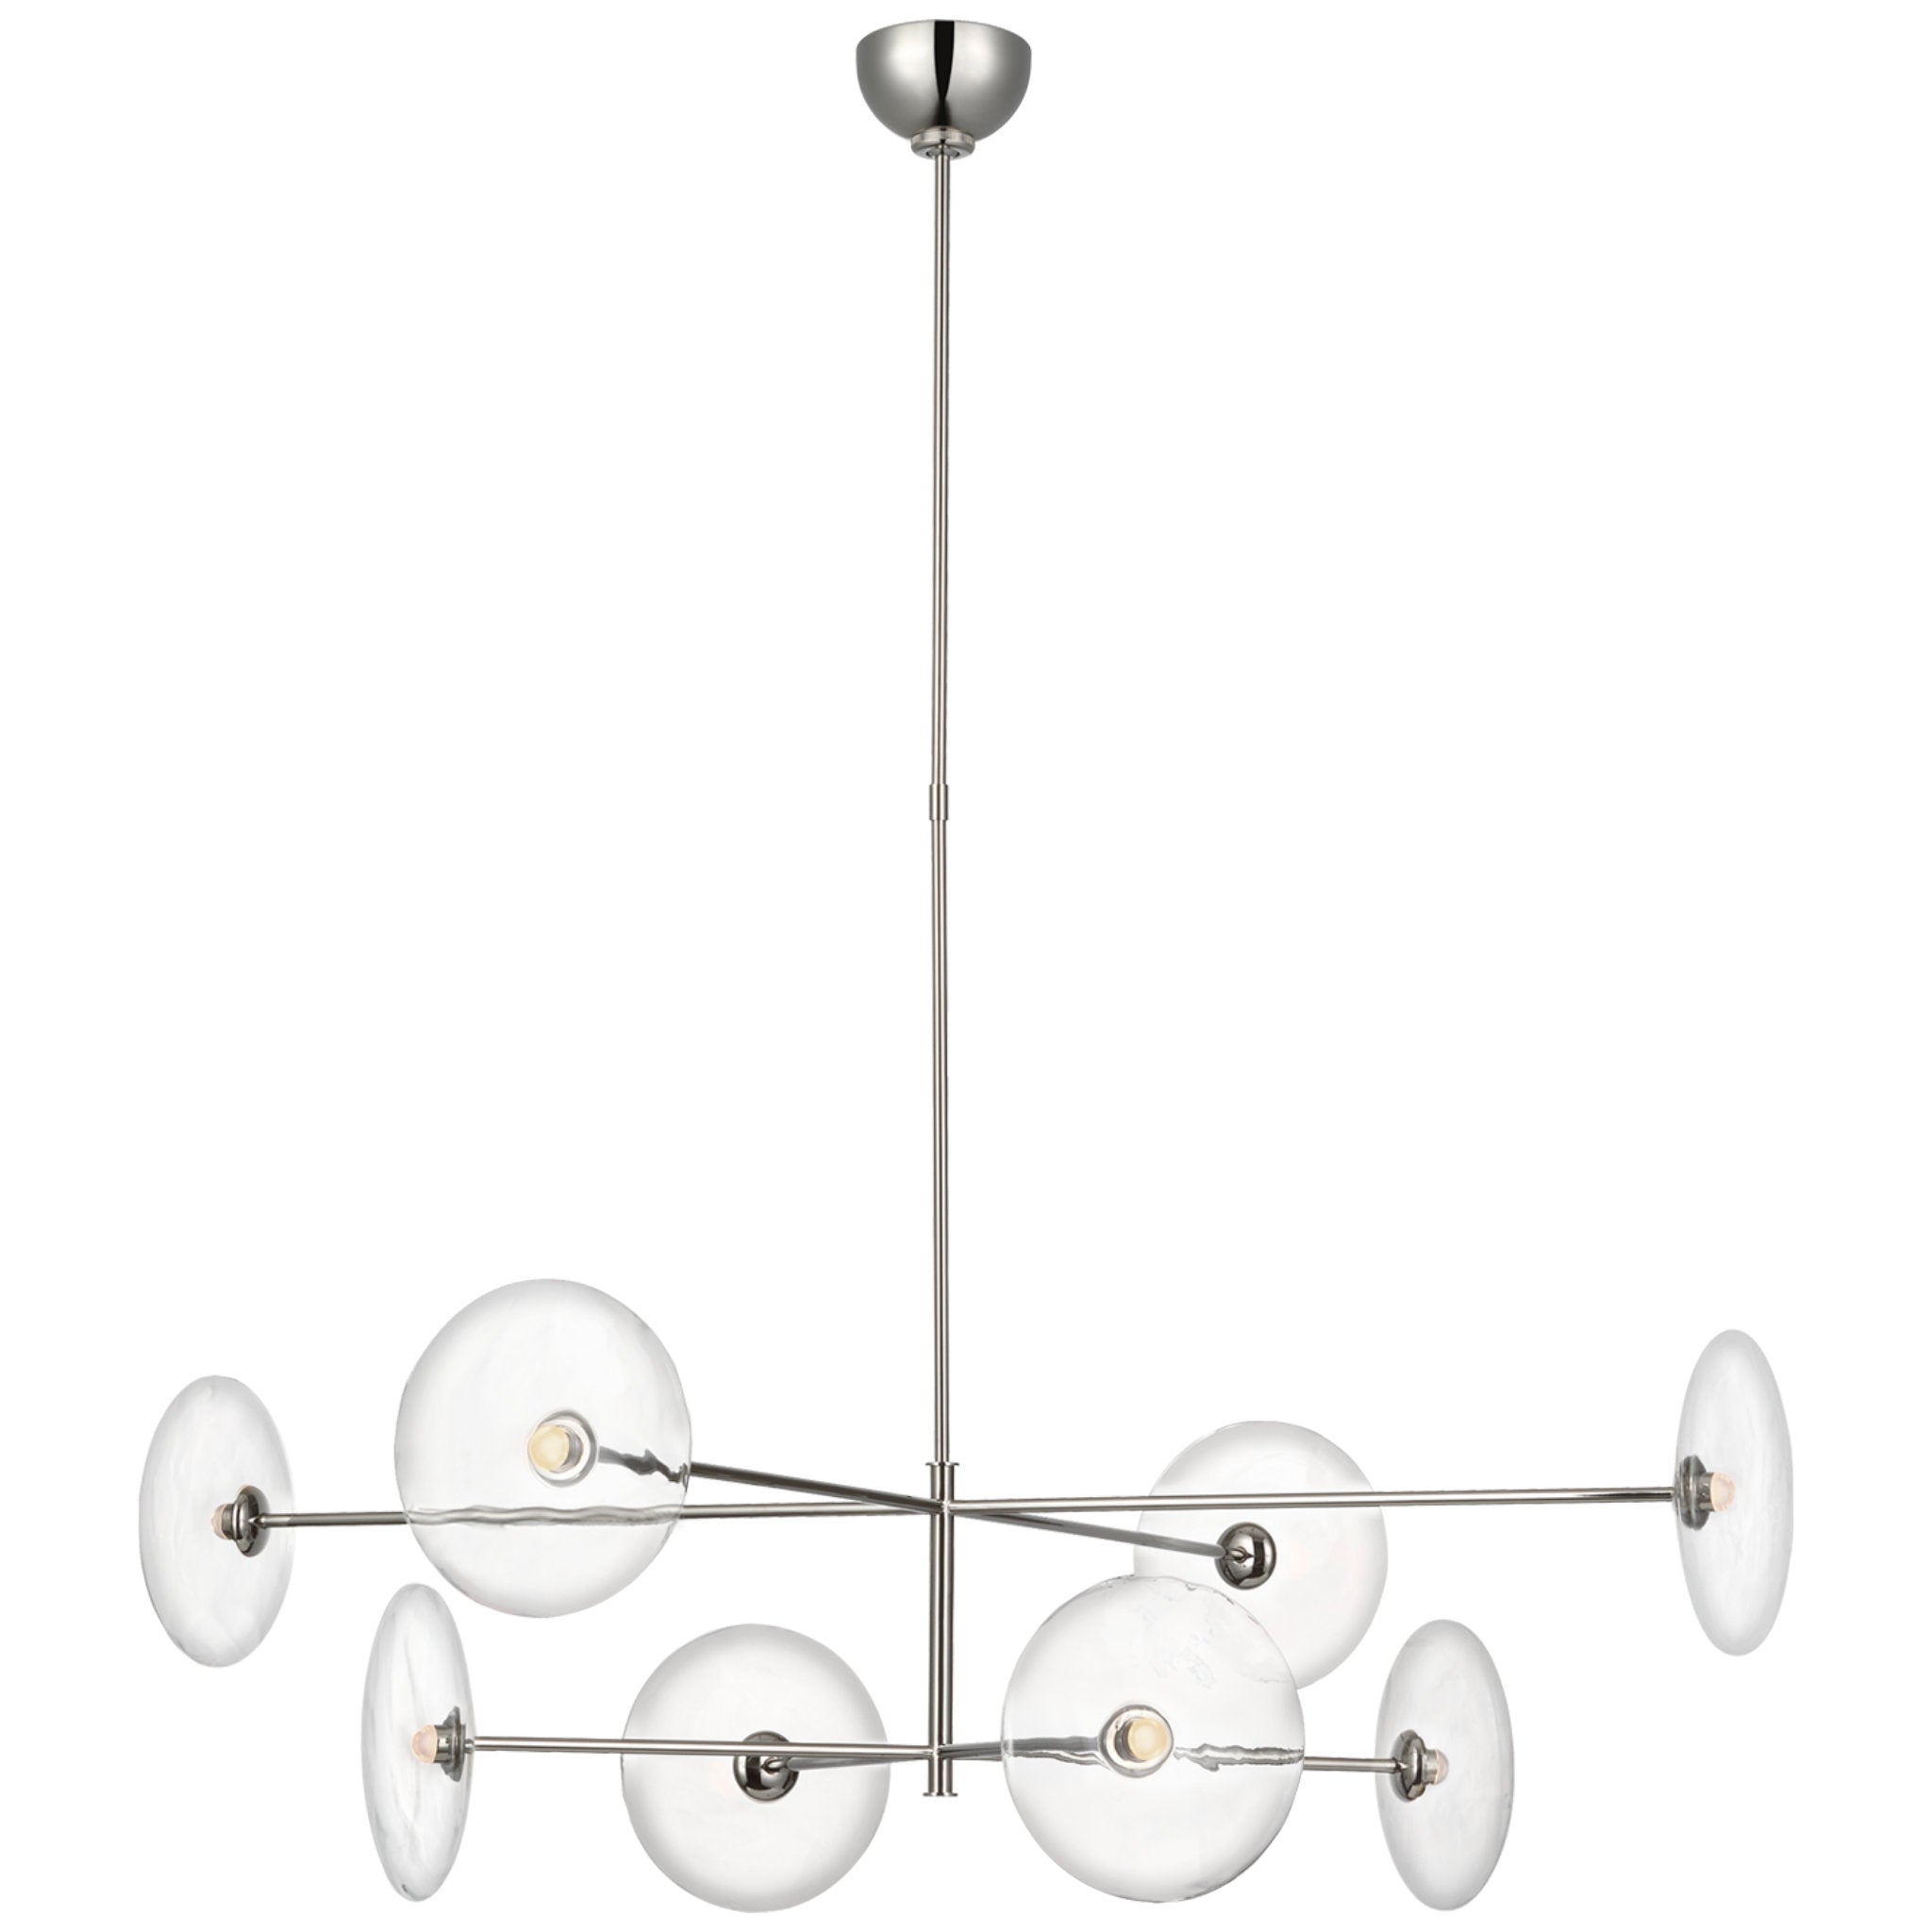 Ian K. Fowler Calvino X-Large Radial Chandelier in Polished Nickel with Clear Glass